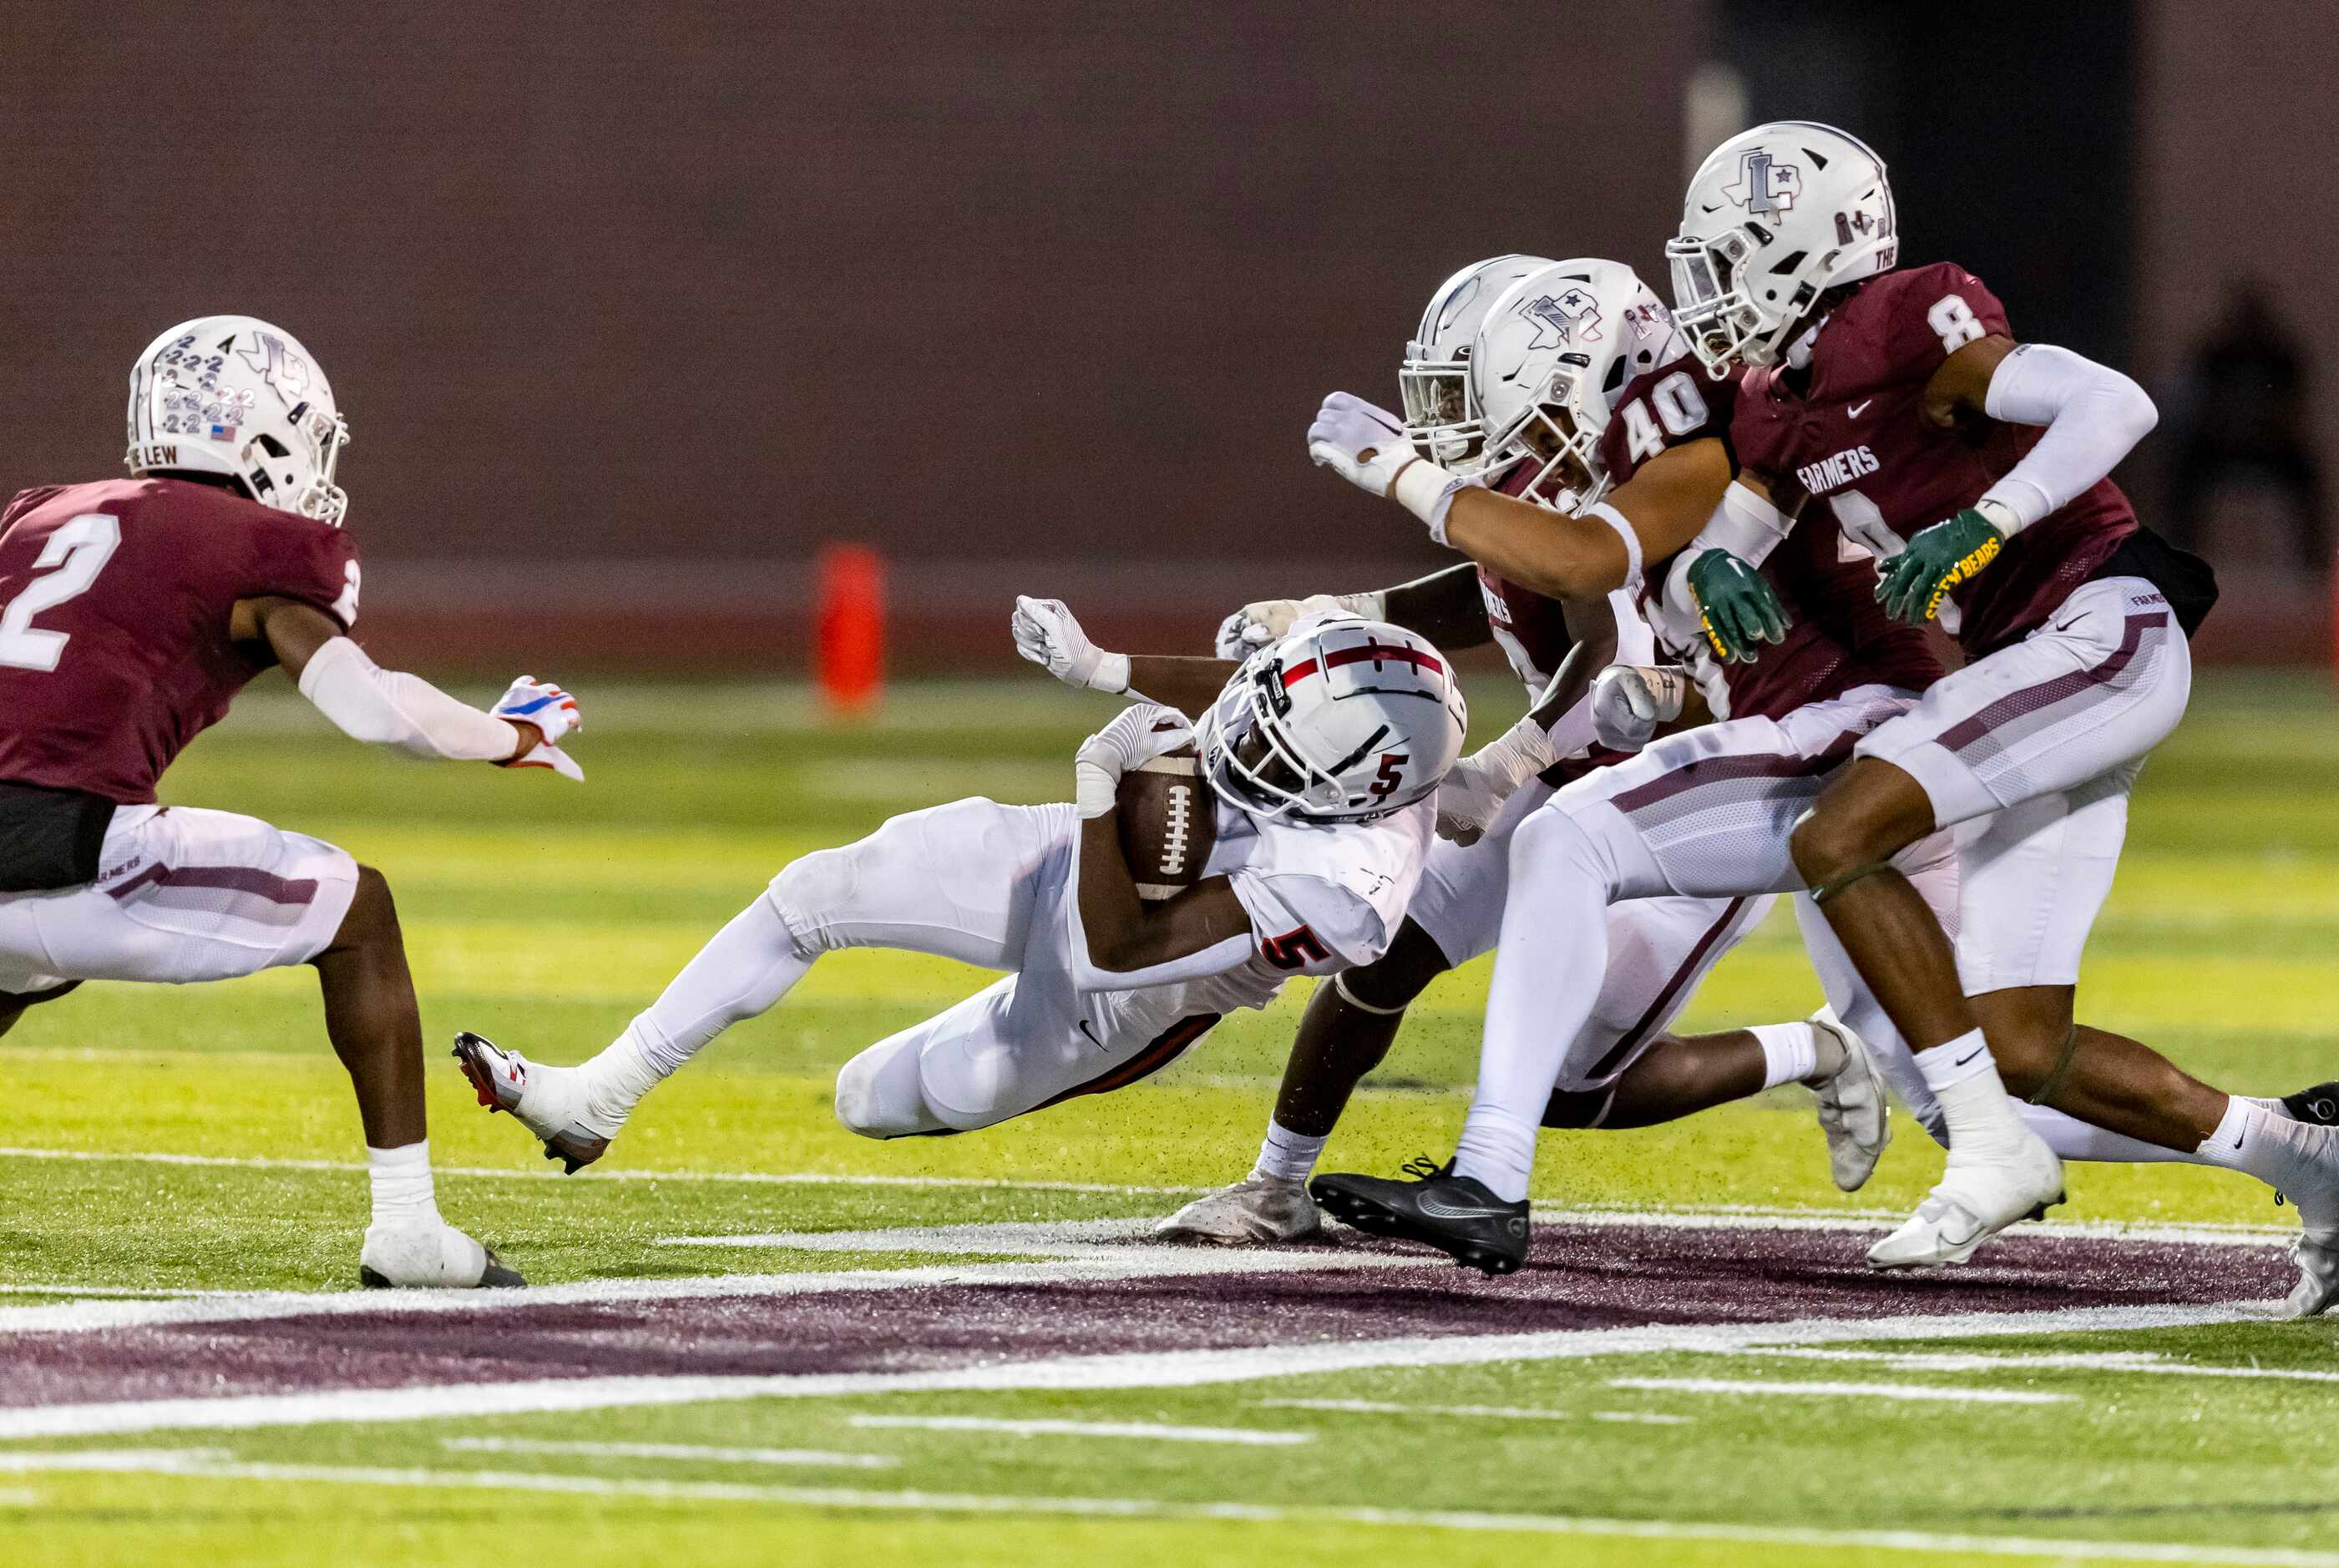 Coppell senior running back Malkam Wallace (5) is tackled by the Lewisville defense during...